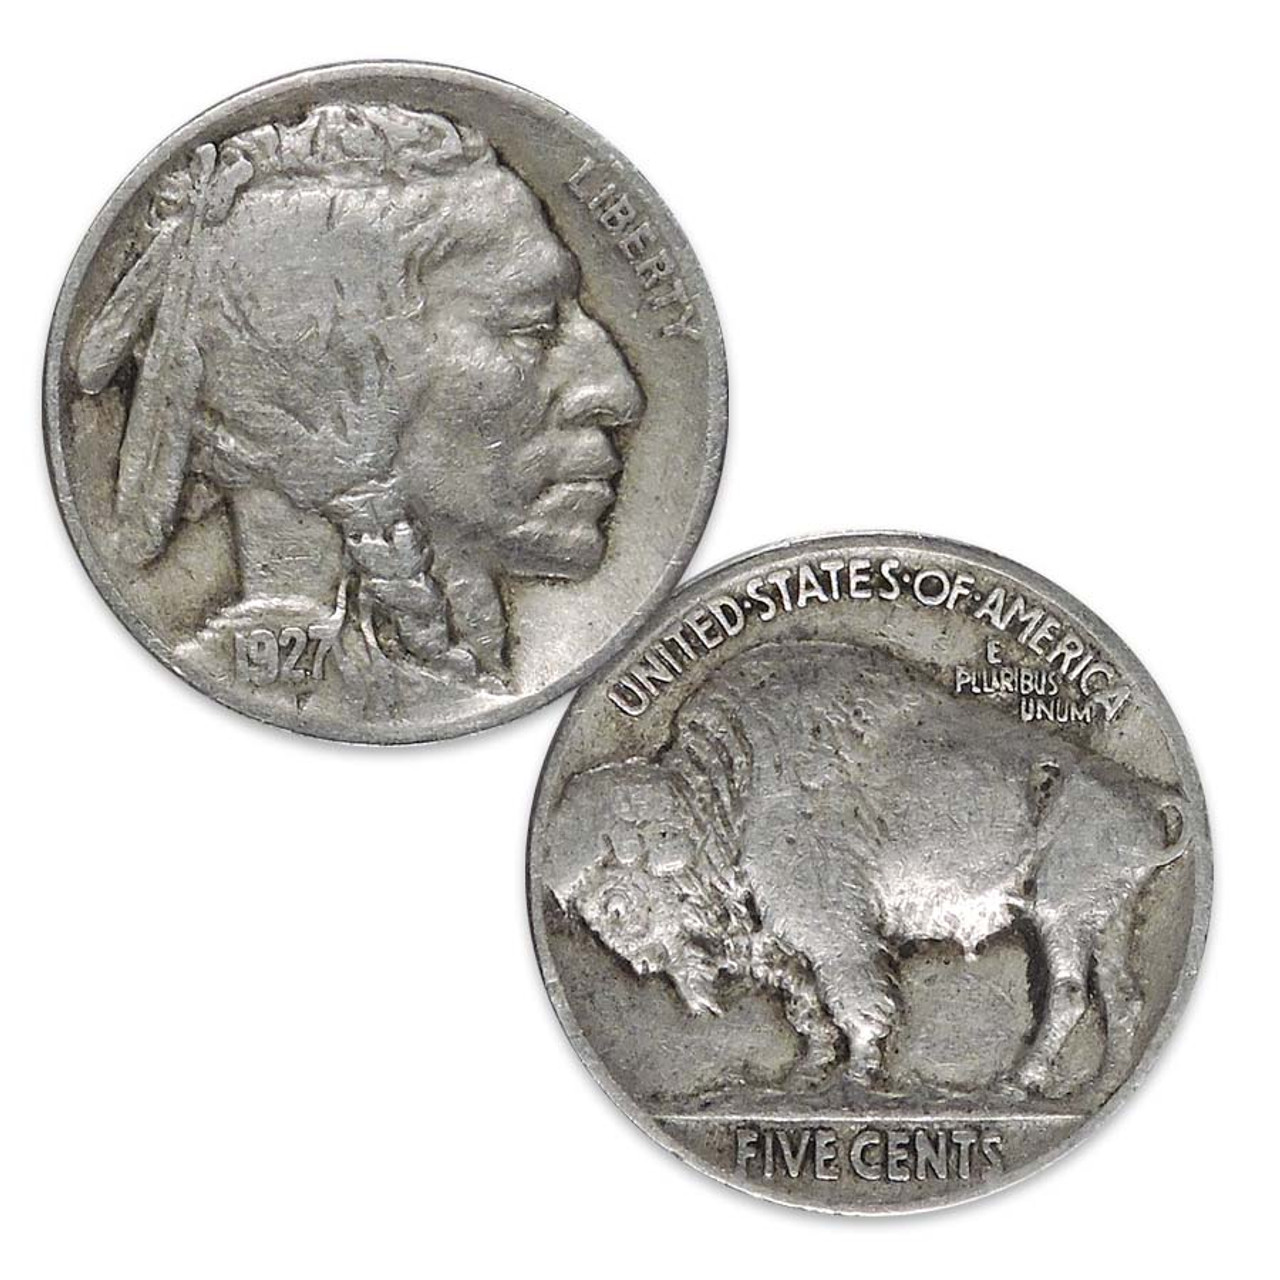 The First-Year Type Set of Uncirculated Buffalo Nickels